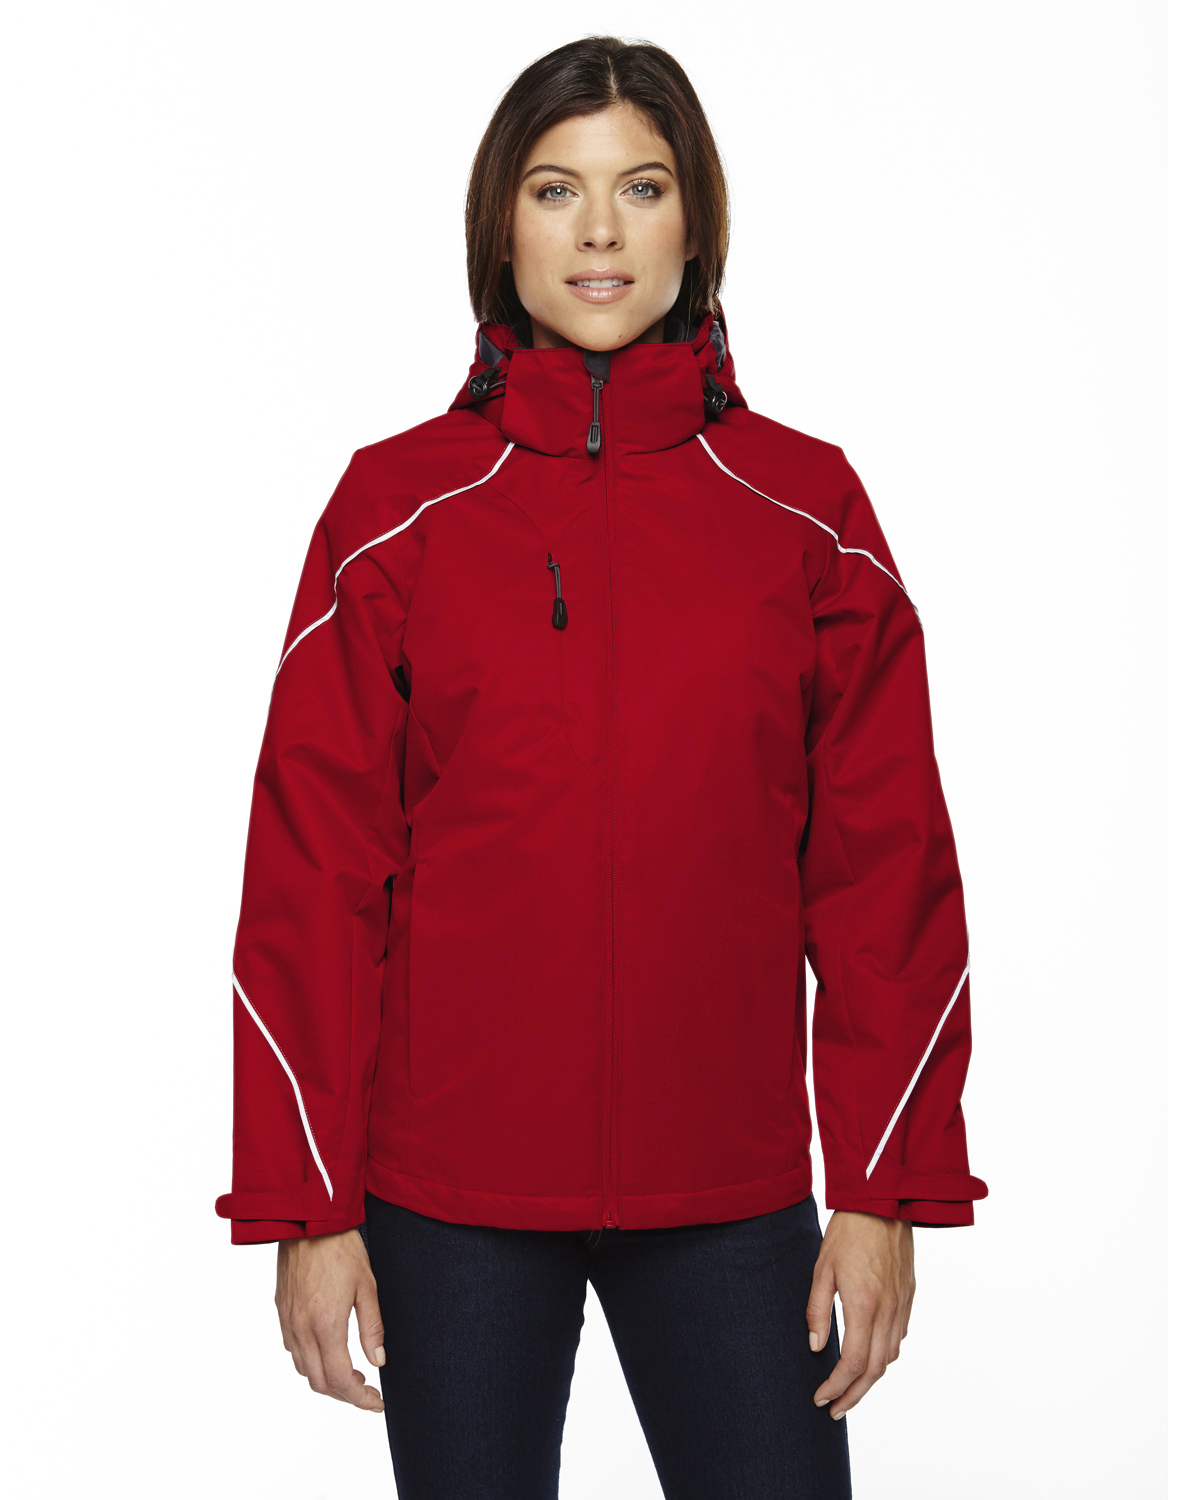 North End Womens 3-in-1 Jacket with Bonded Fleece Liner 78196 